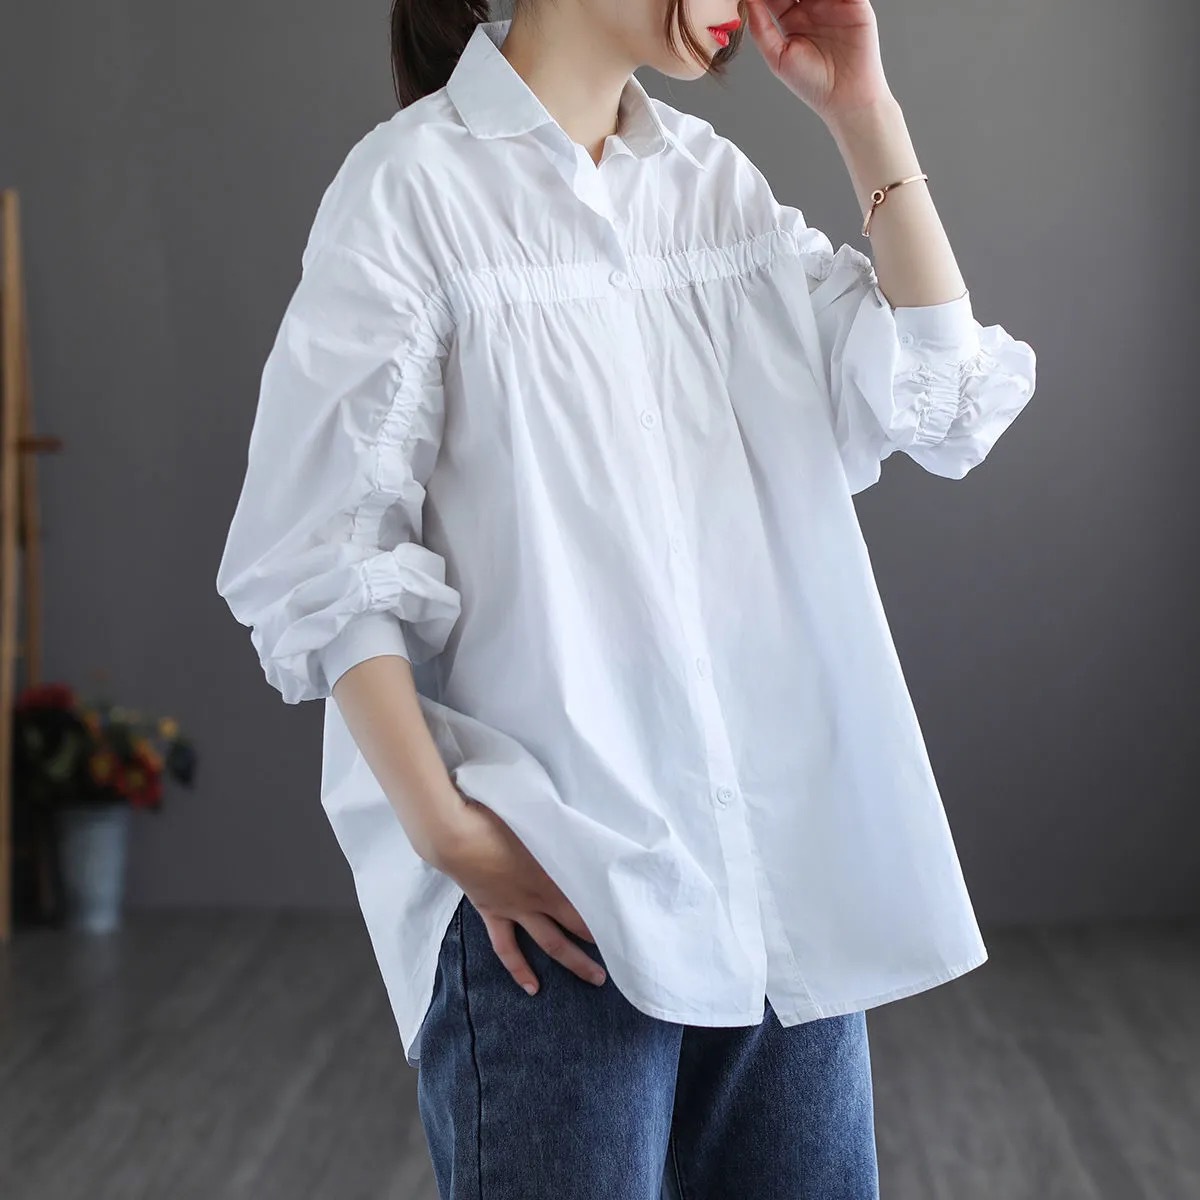 Literature And Art Restore Ancient Top, Stitching Shirt, Pure Color Leisure Shirt